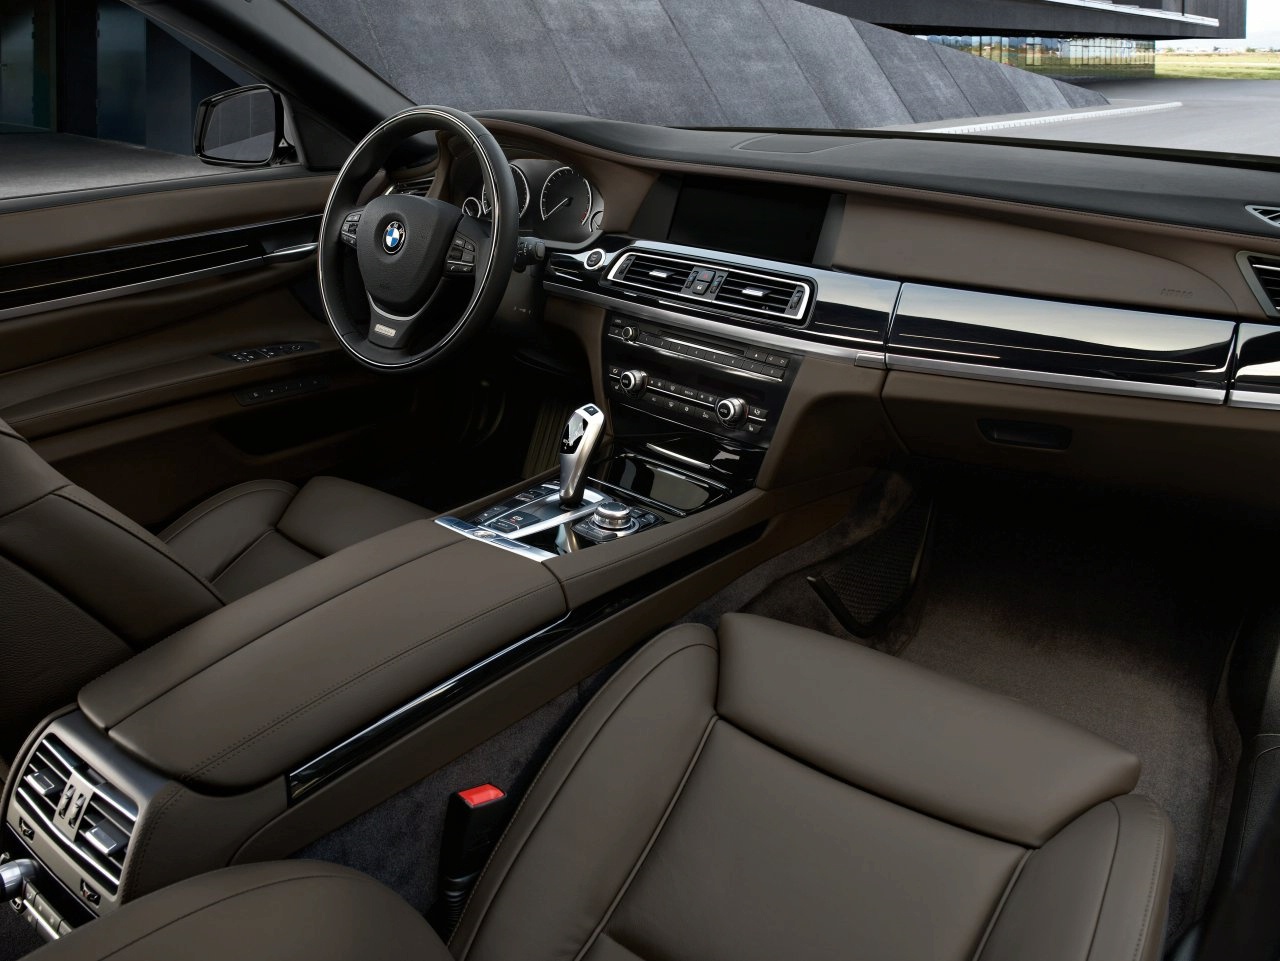 BMW 7 Series Sedan   Car Review 2012 and Pictures   LUXURY CARS